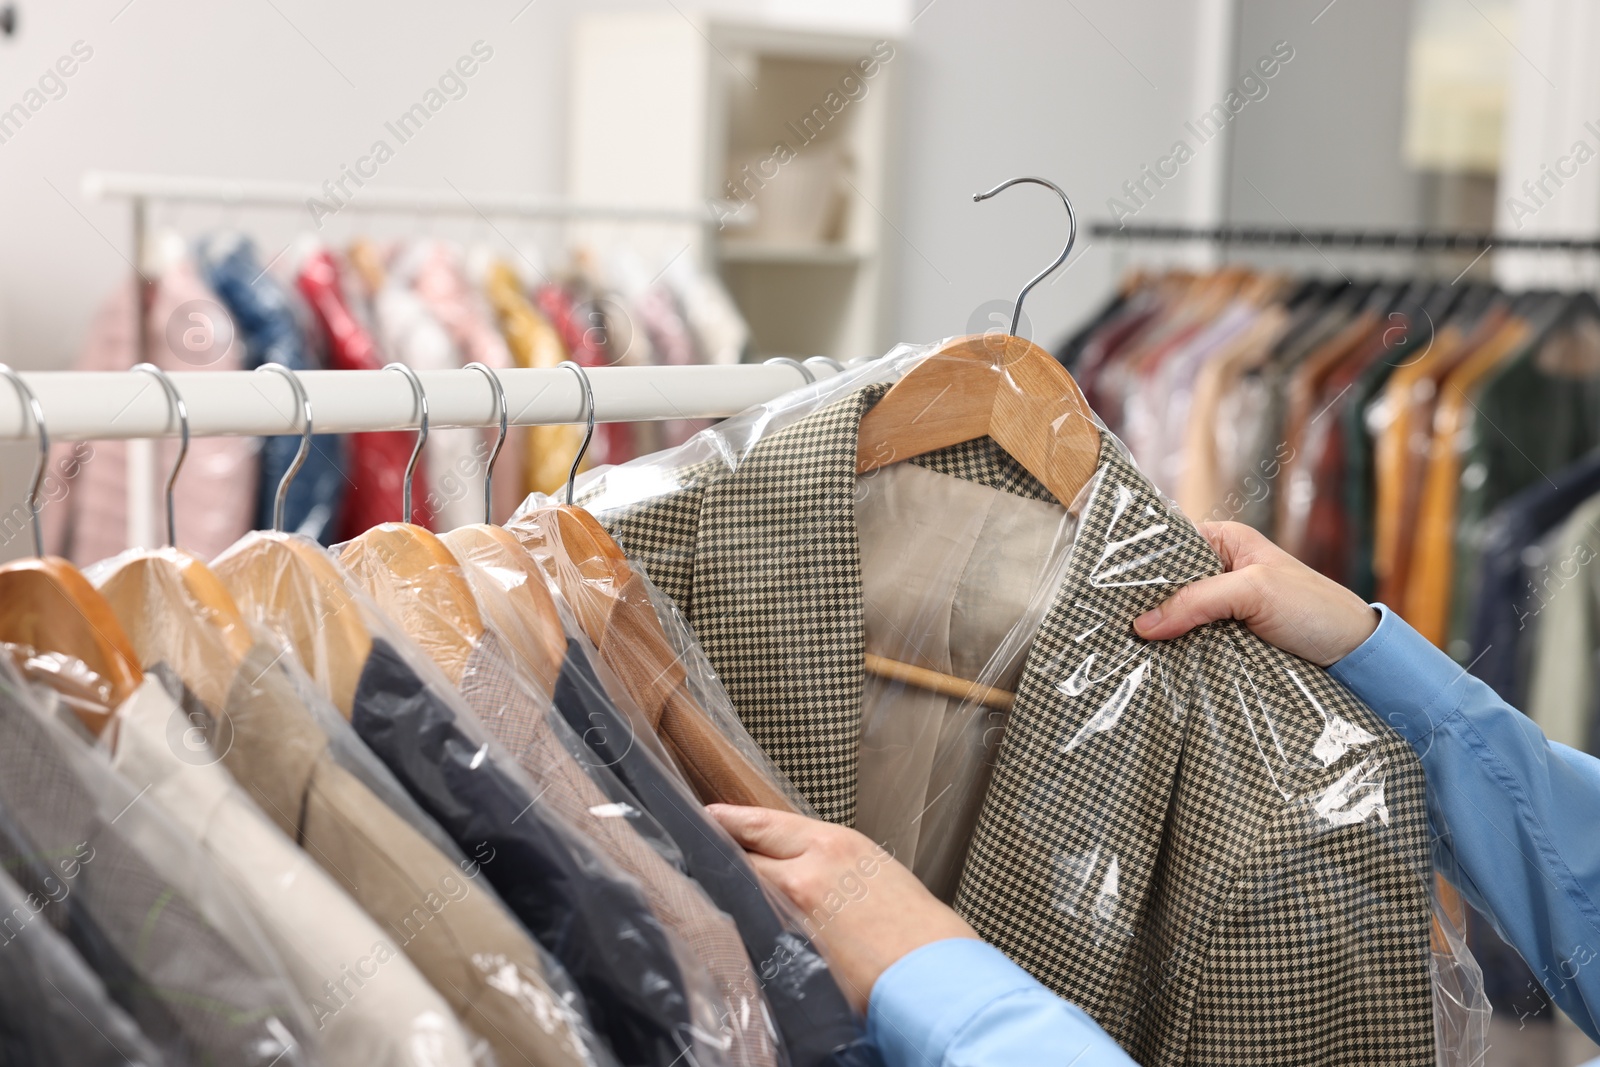 Photo of Dry-cleaning service. Woman taking jacket in plastic bag from rack indoors, closeup